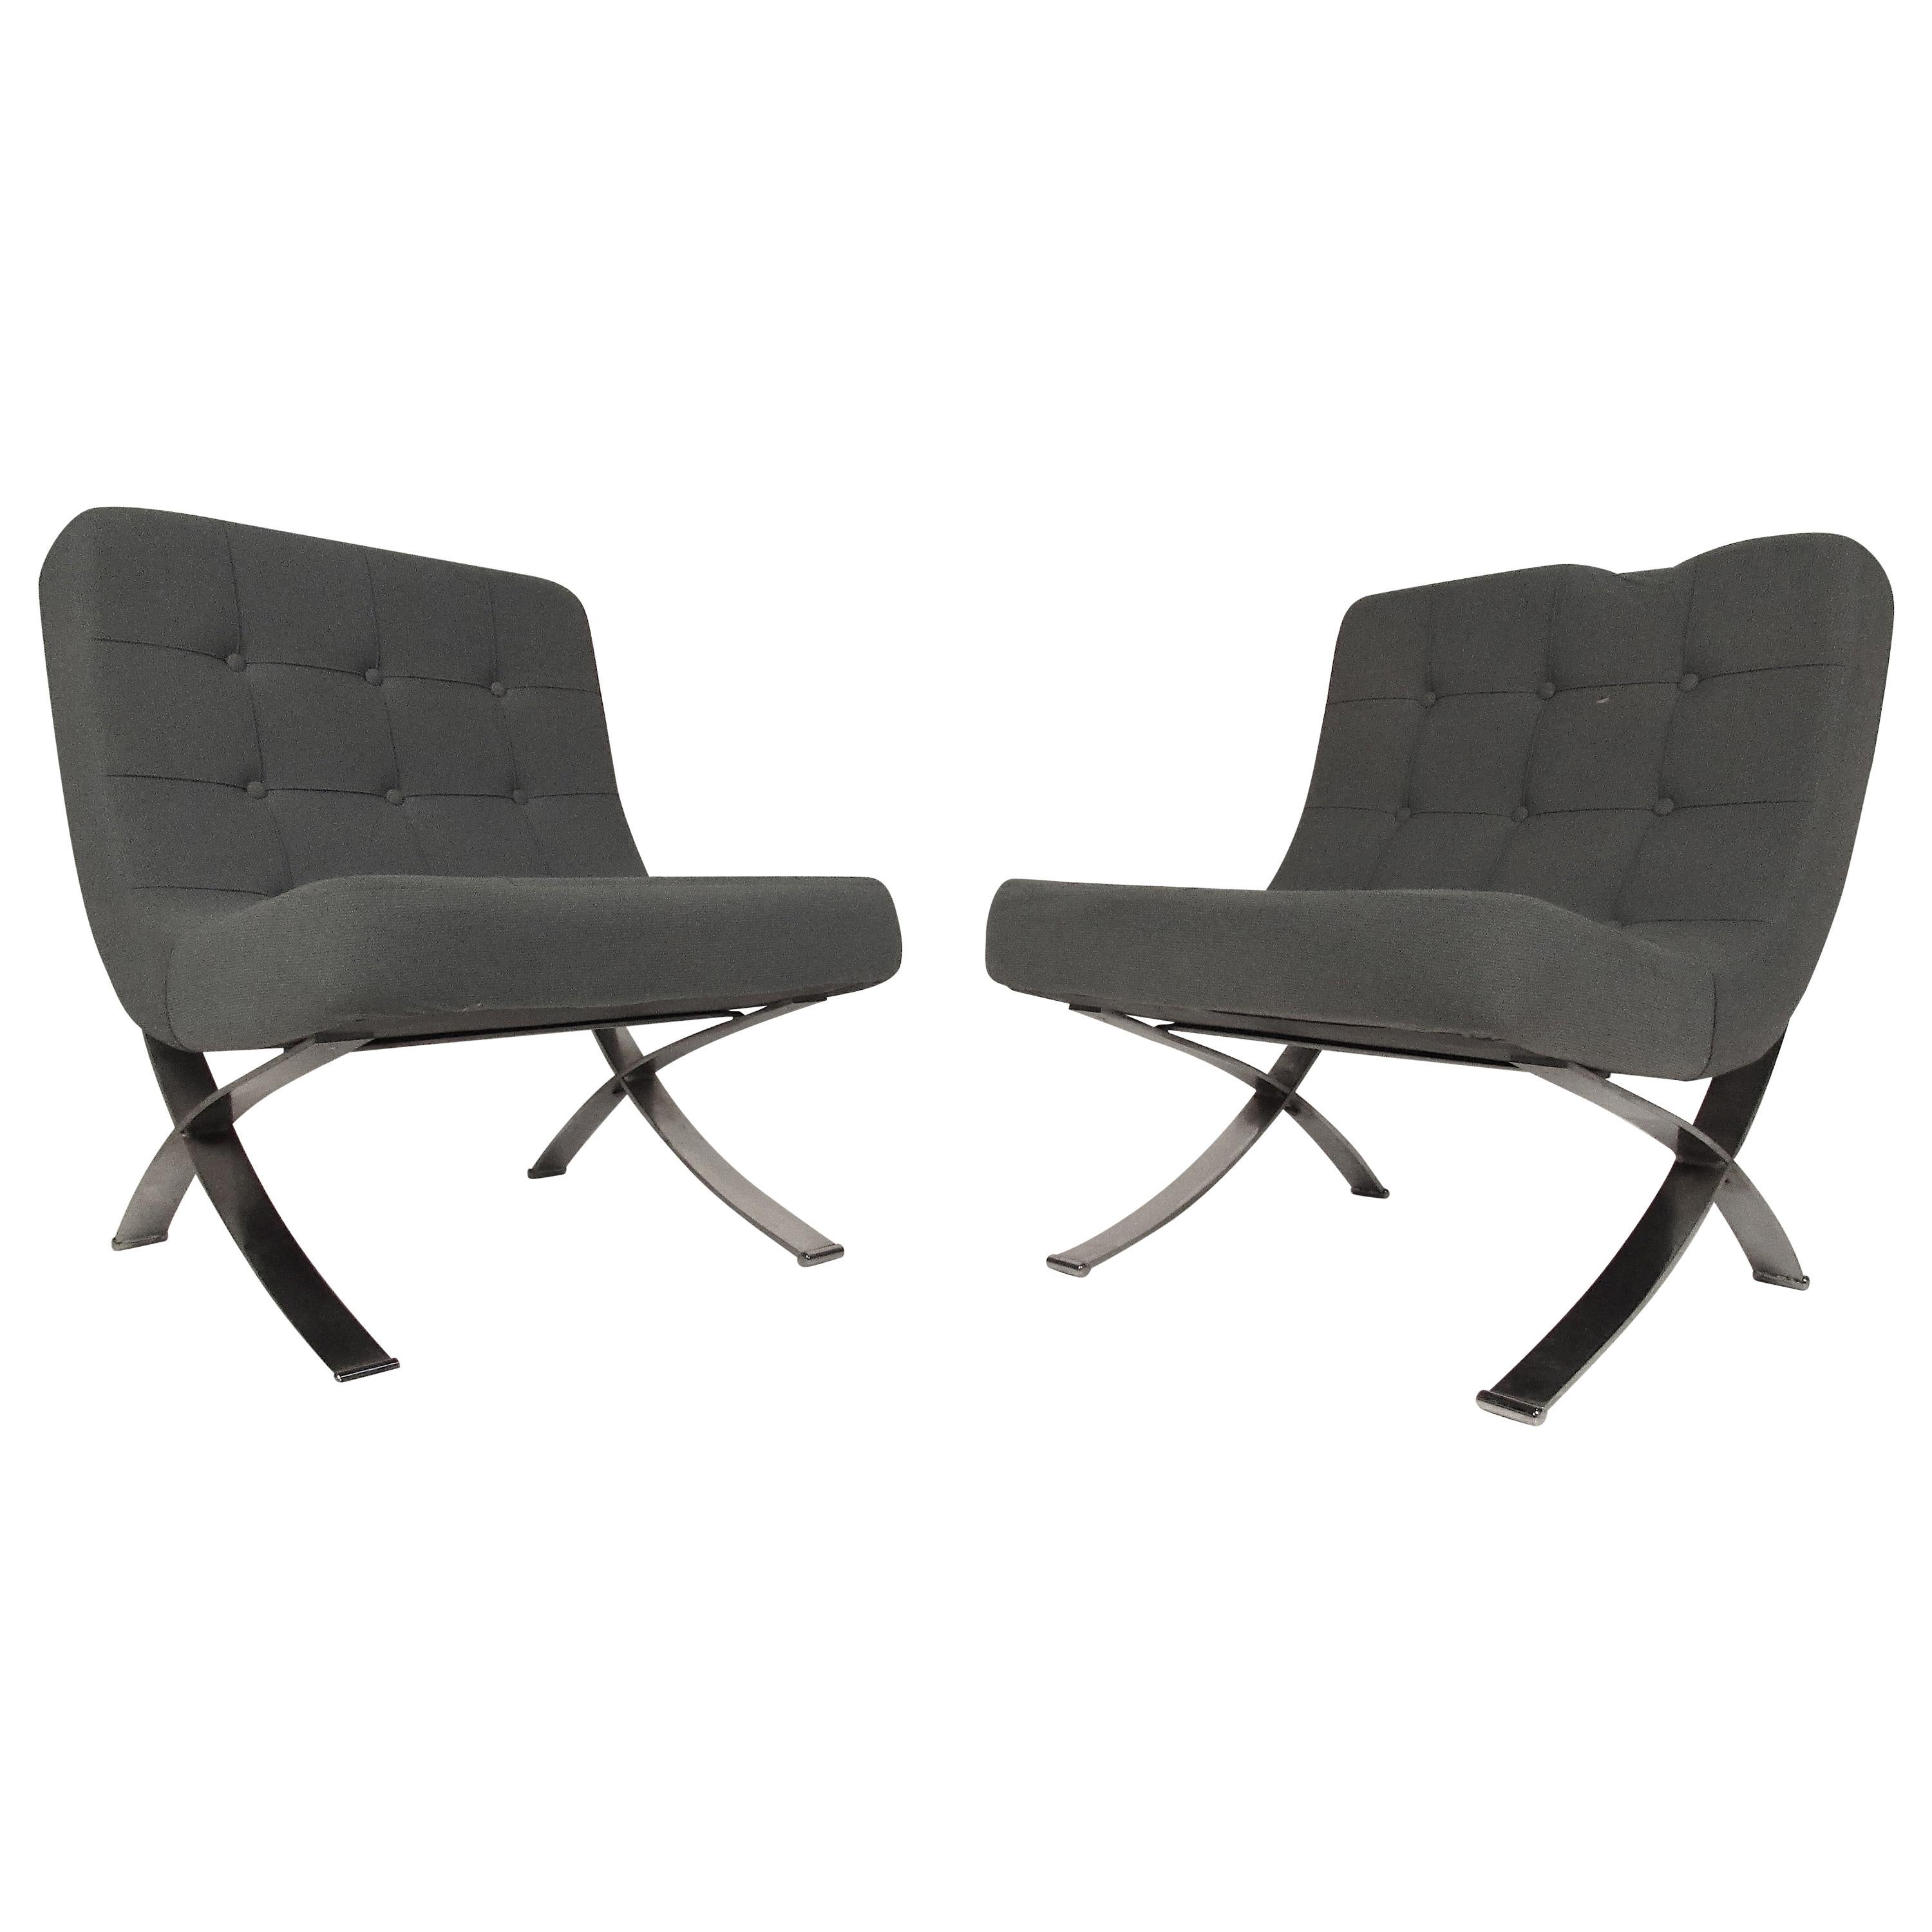 Pair of Vintage Modern Barcelona Style Slipper Lounge Chairs